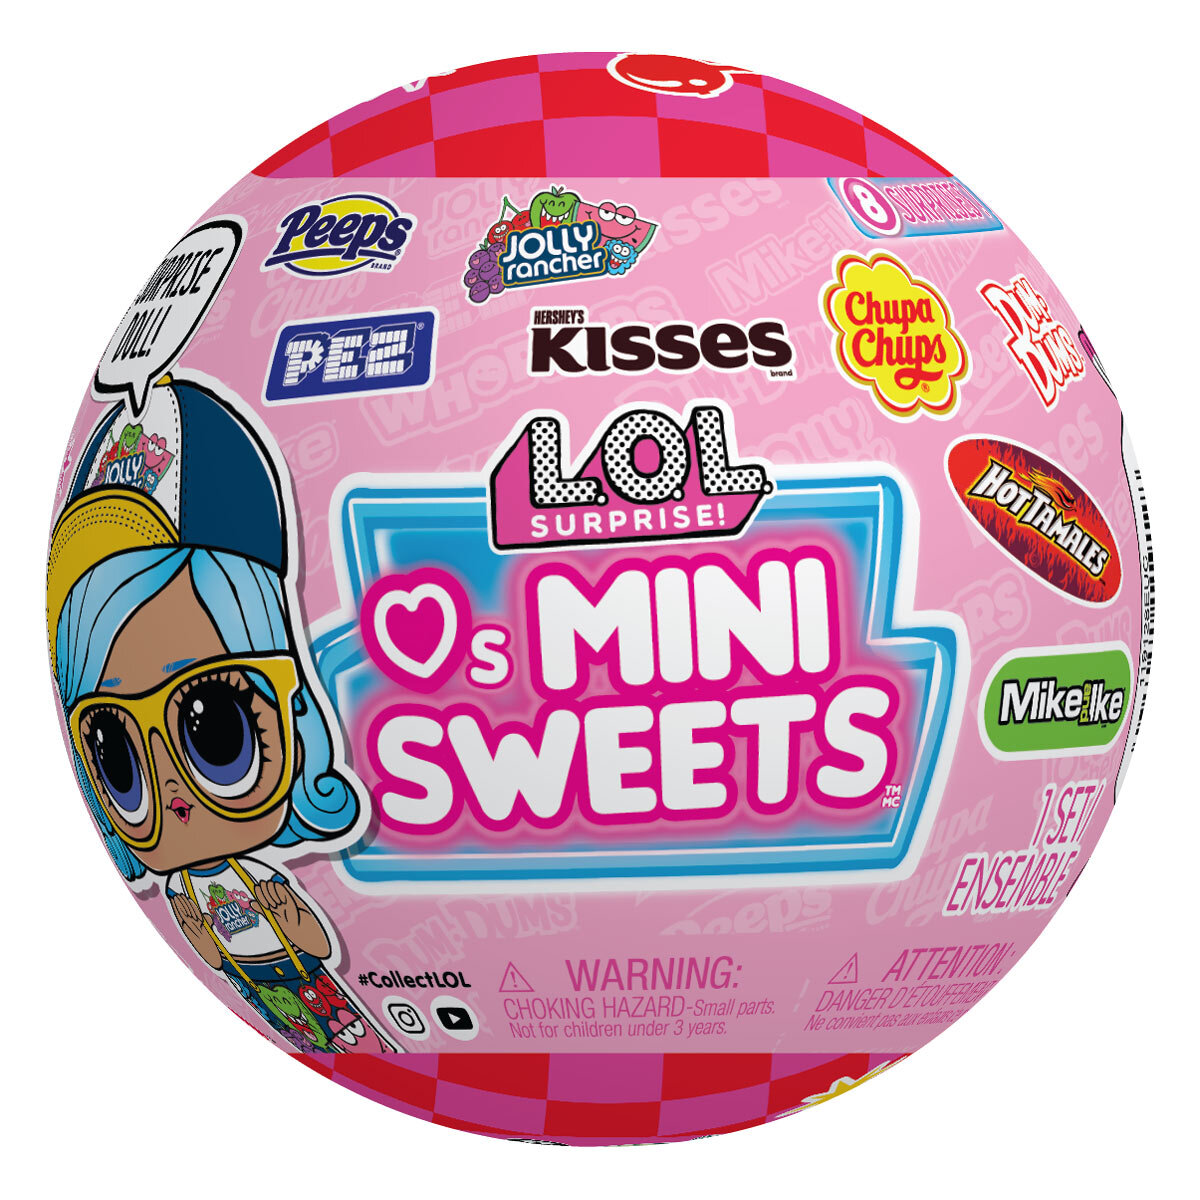 Buy LOL SURPRISE LOVES MINI Sweets Combined Feature Image at Costco.co.uk